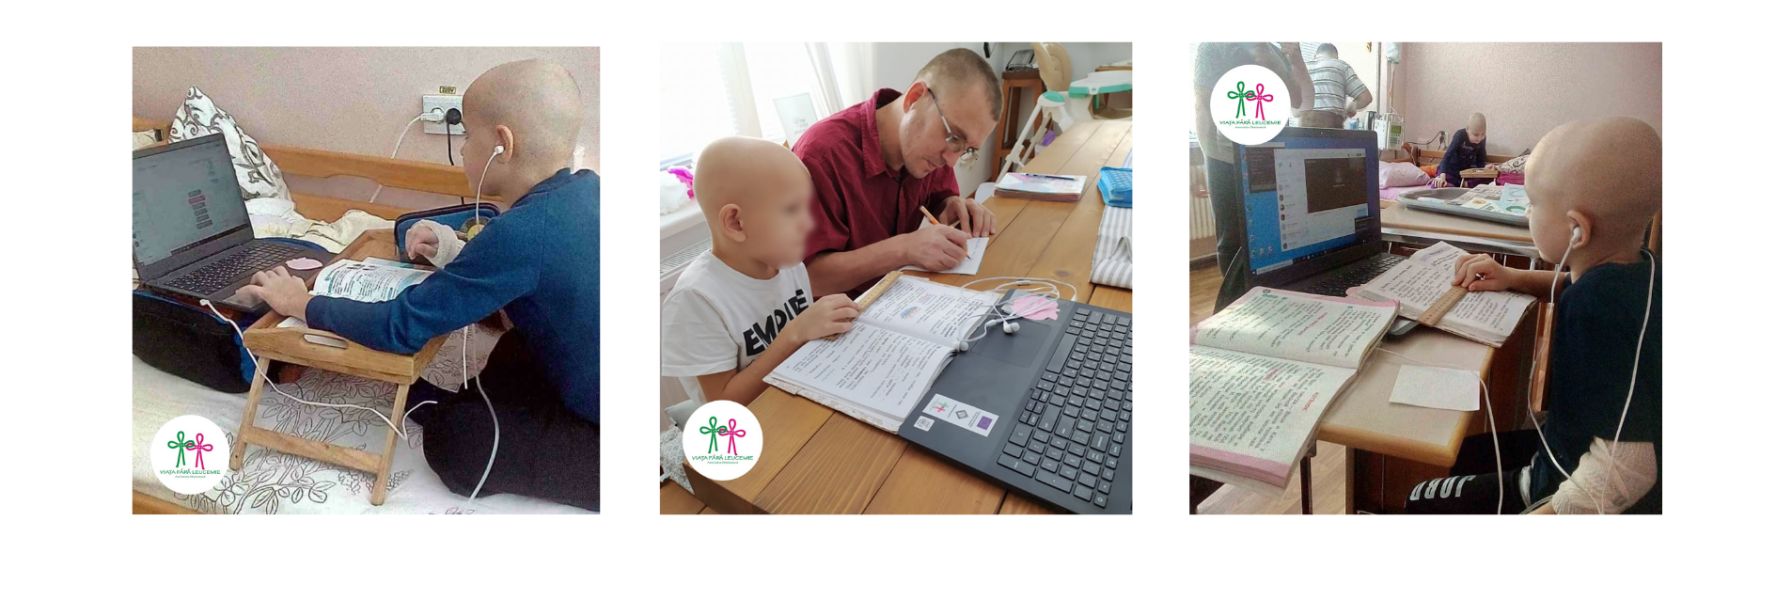 Enabling online education for young cancer patients in Moldova